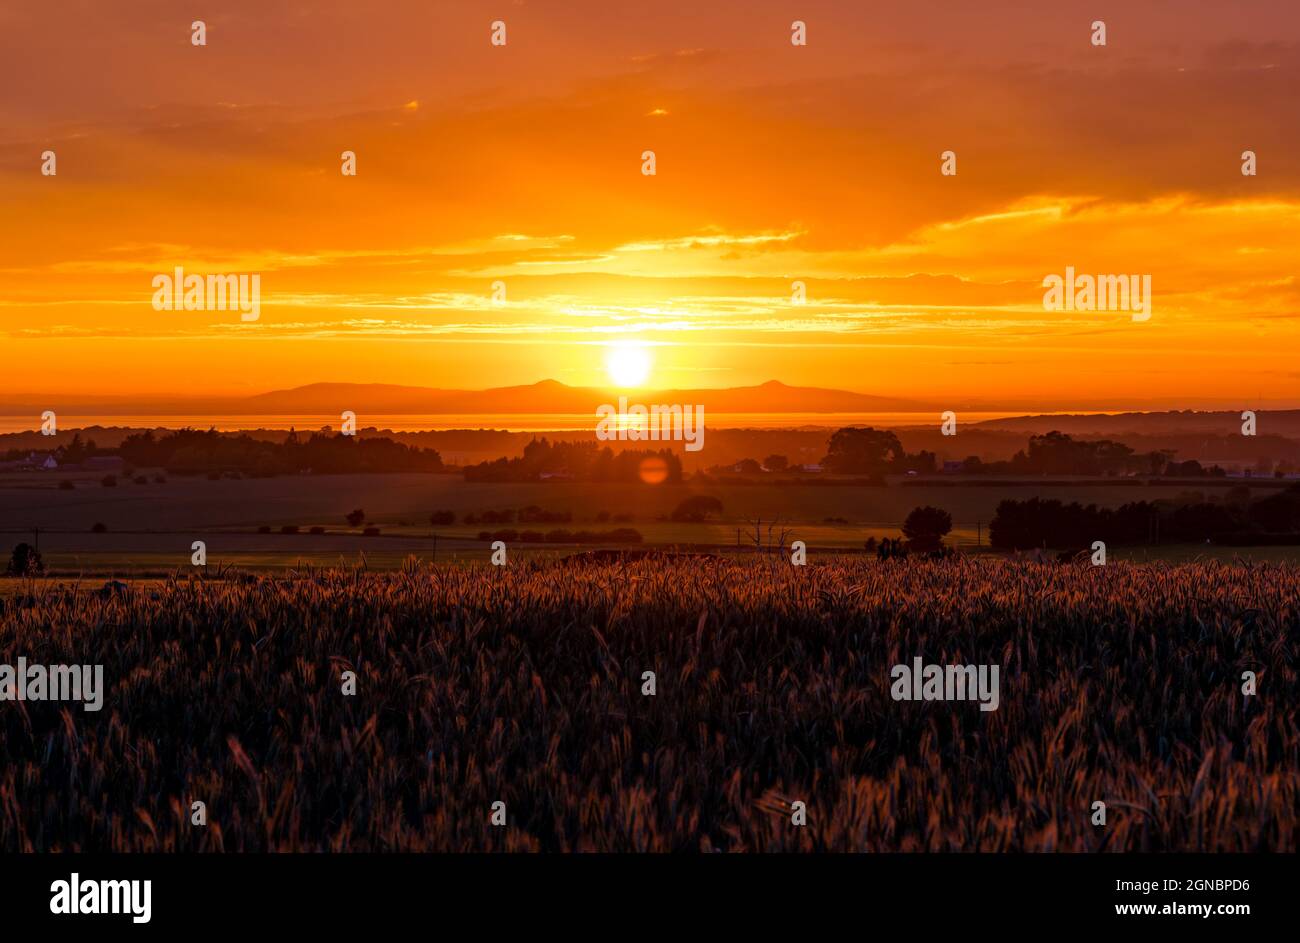 Grain crop field at sunset with colourful orange sky looking across Firth of Forth to Lomond Hills in Fife, Scotland, UK Stock Photo